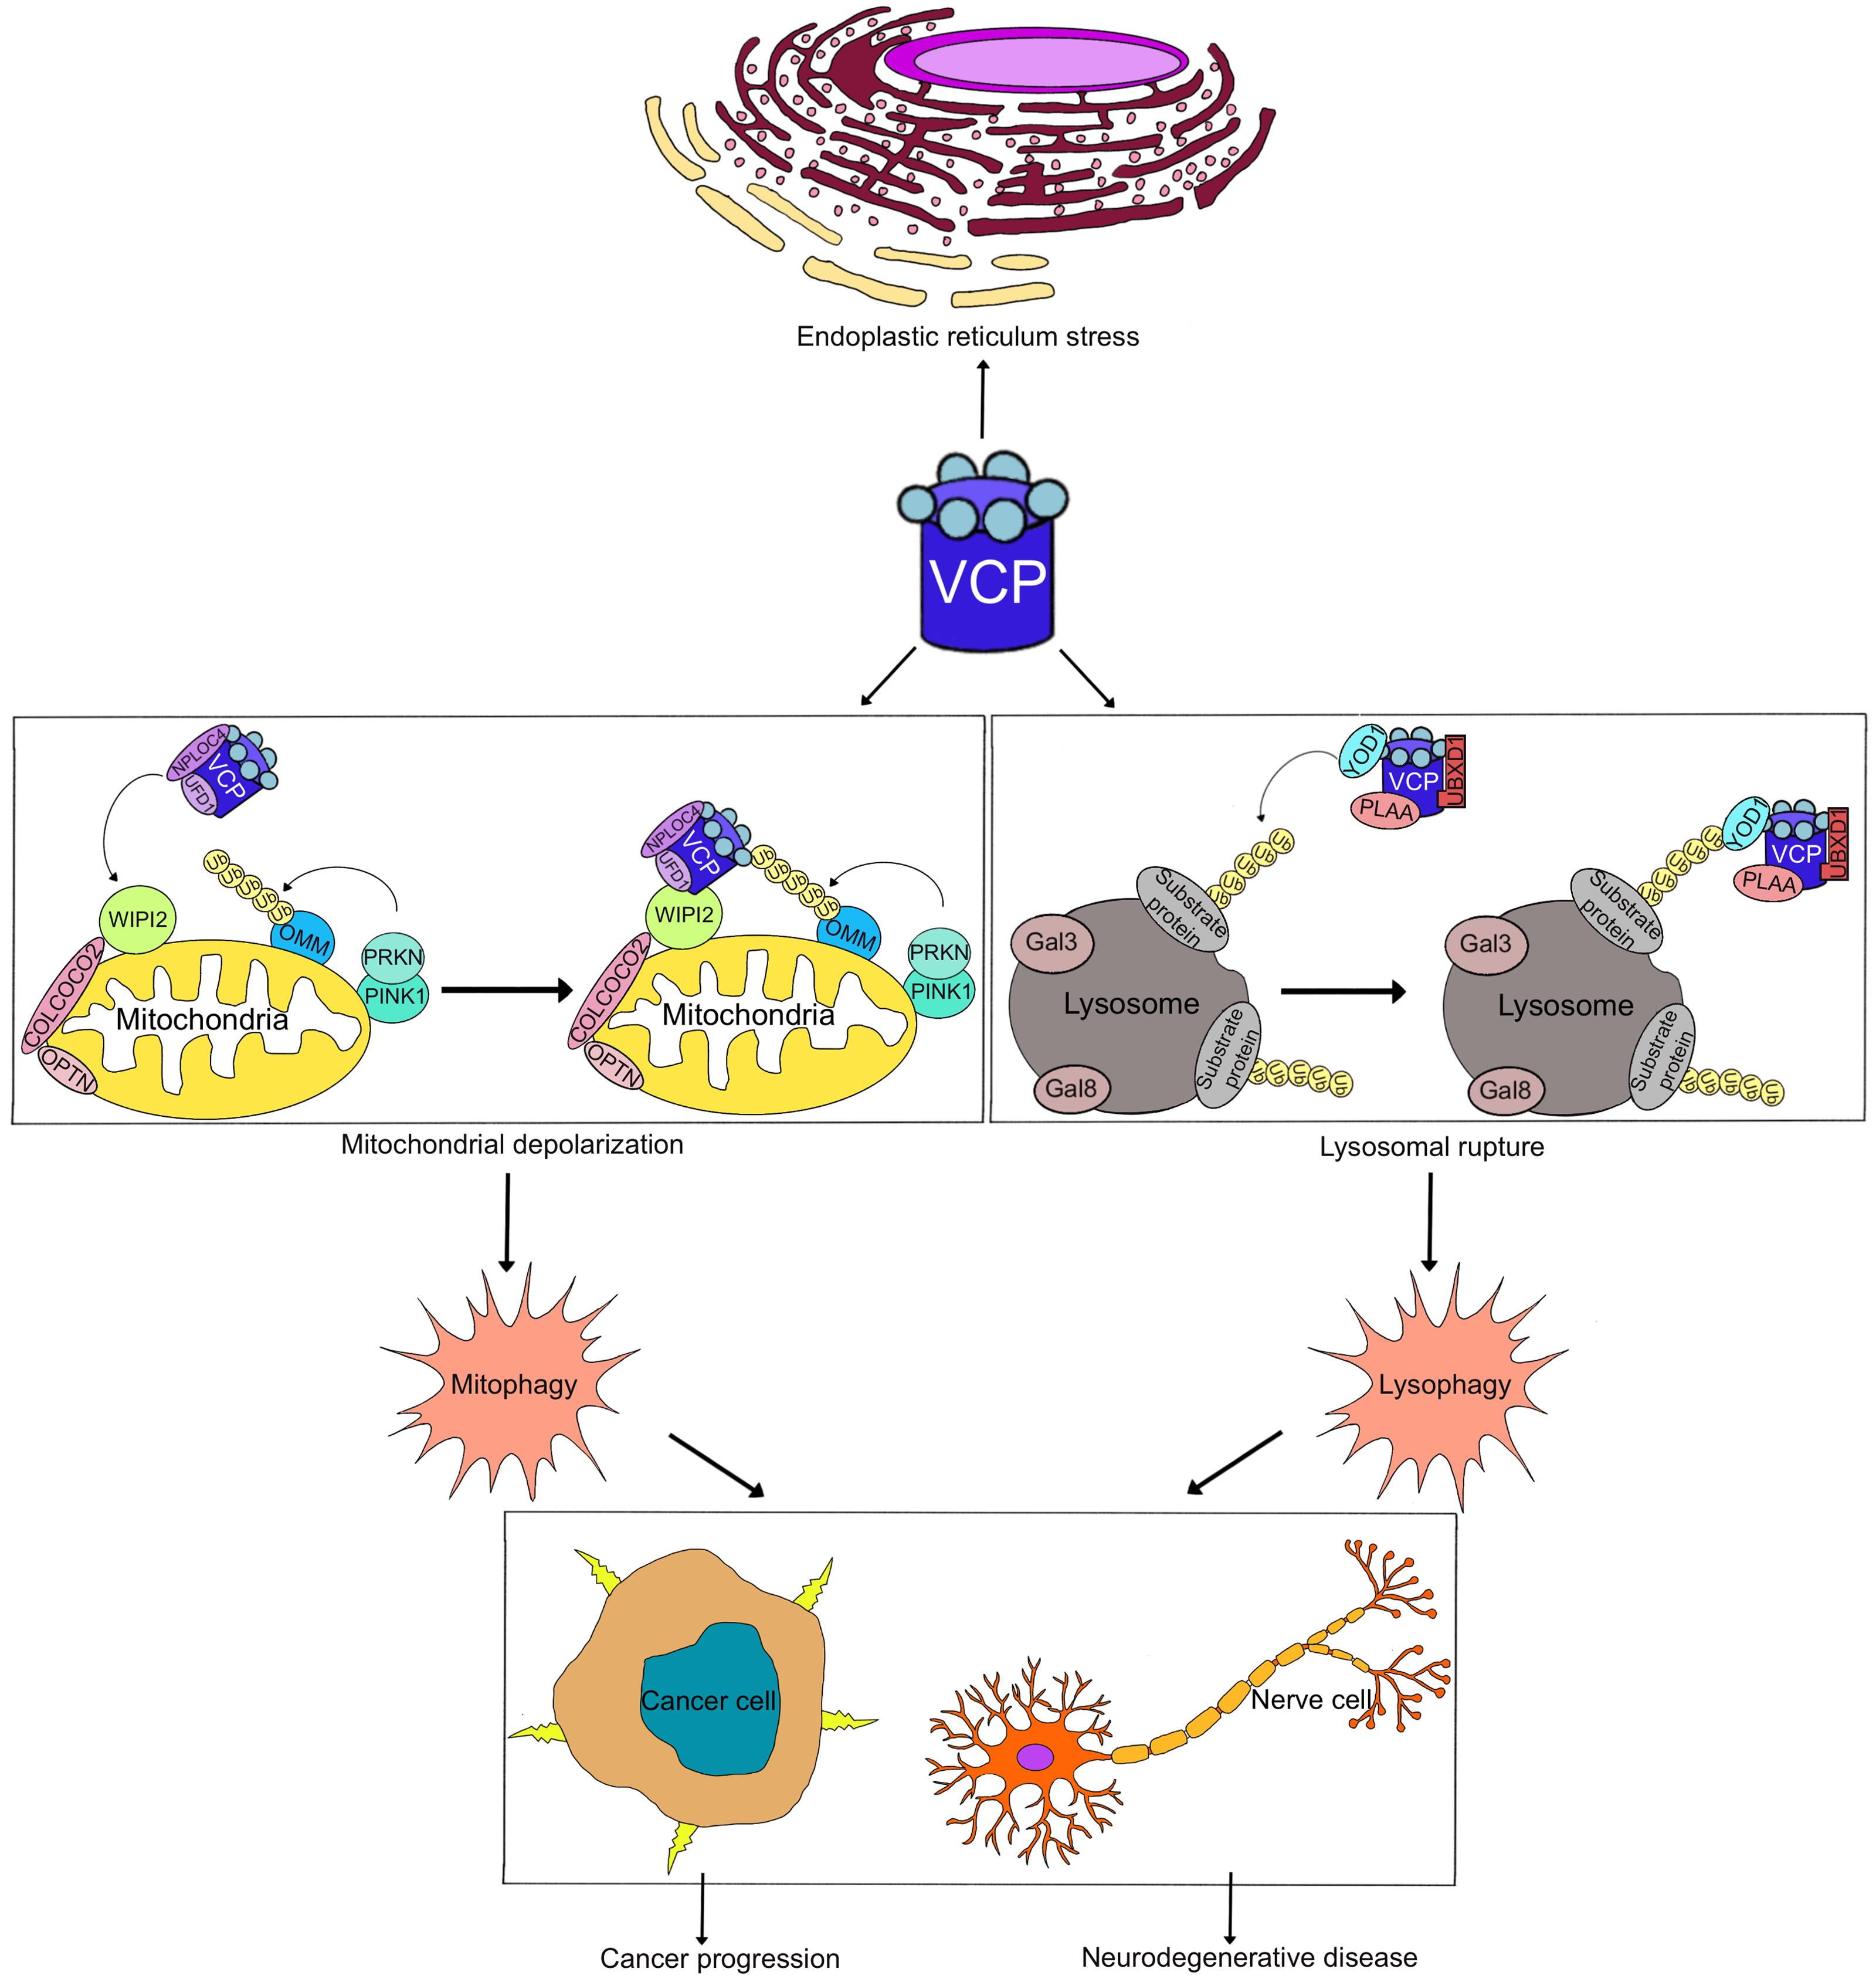 Scheme of VCP in mediating organelle-specific autophagy.